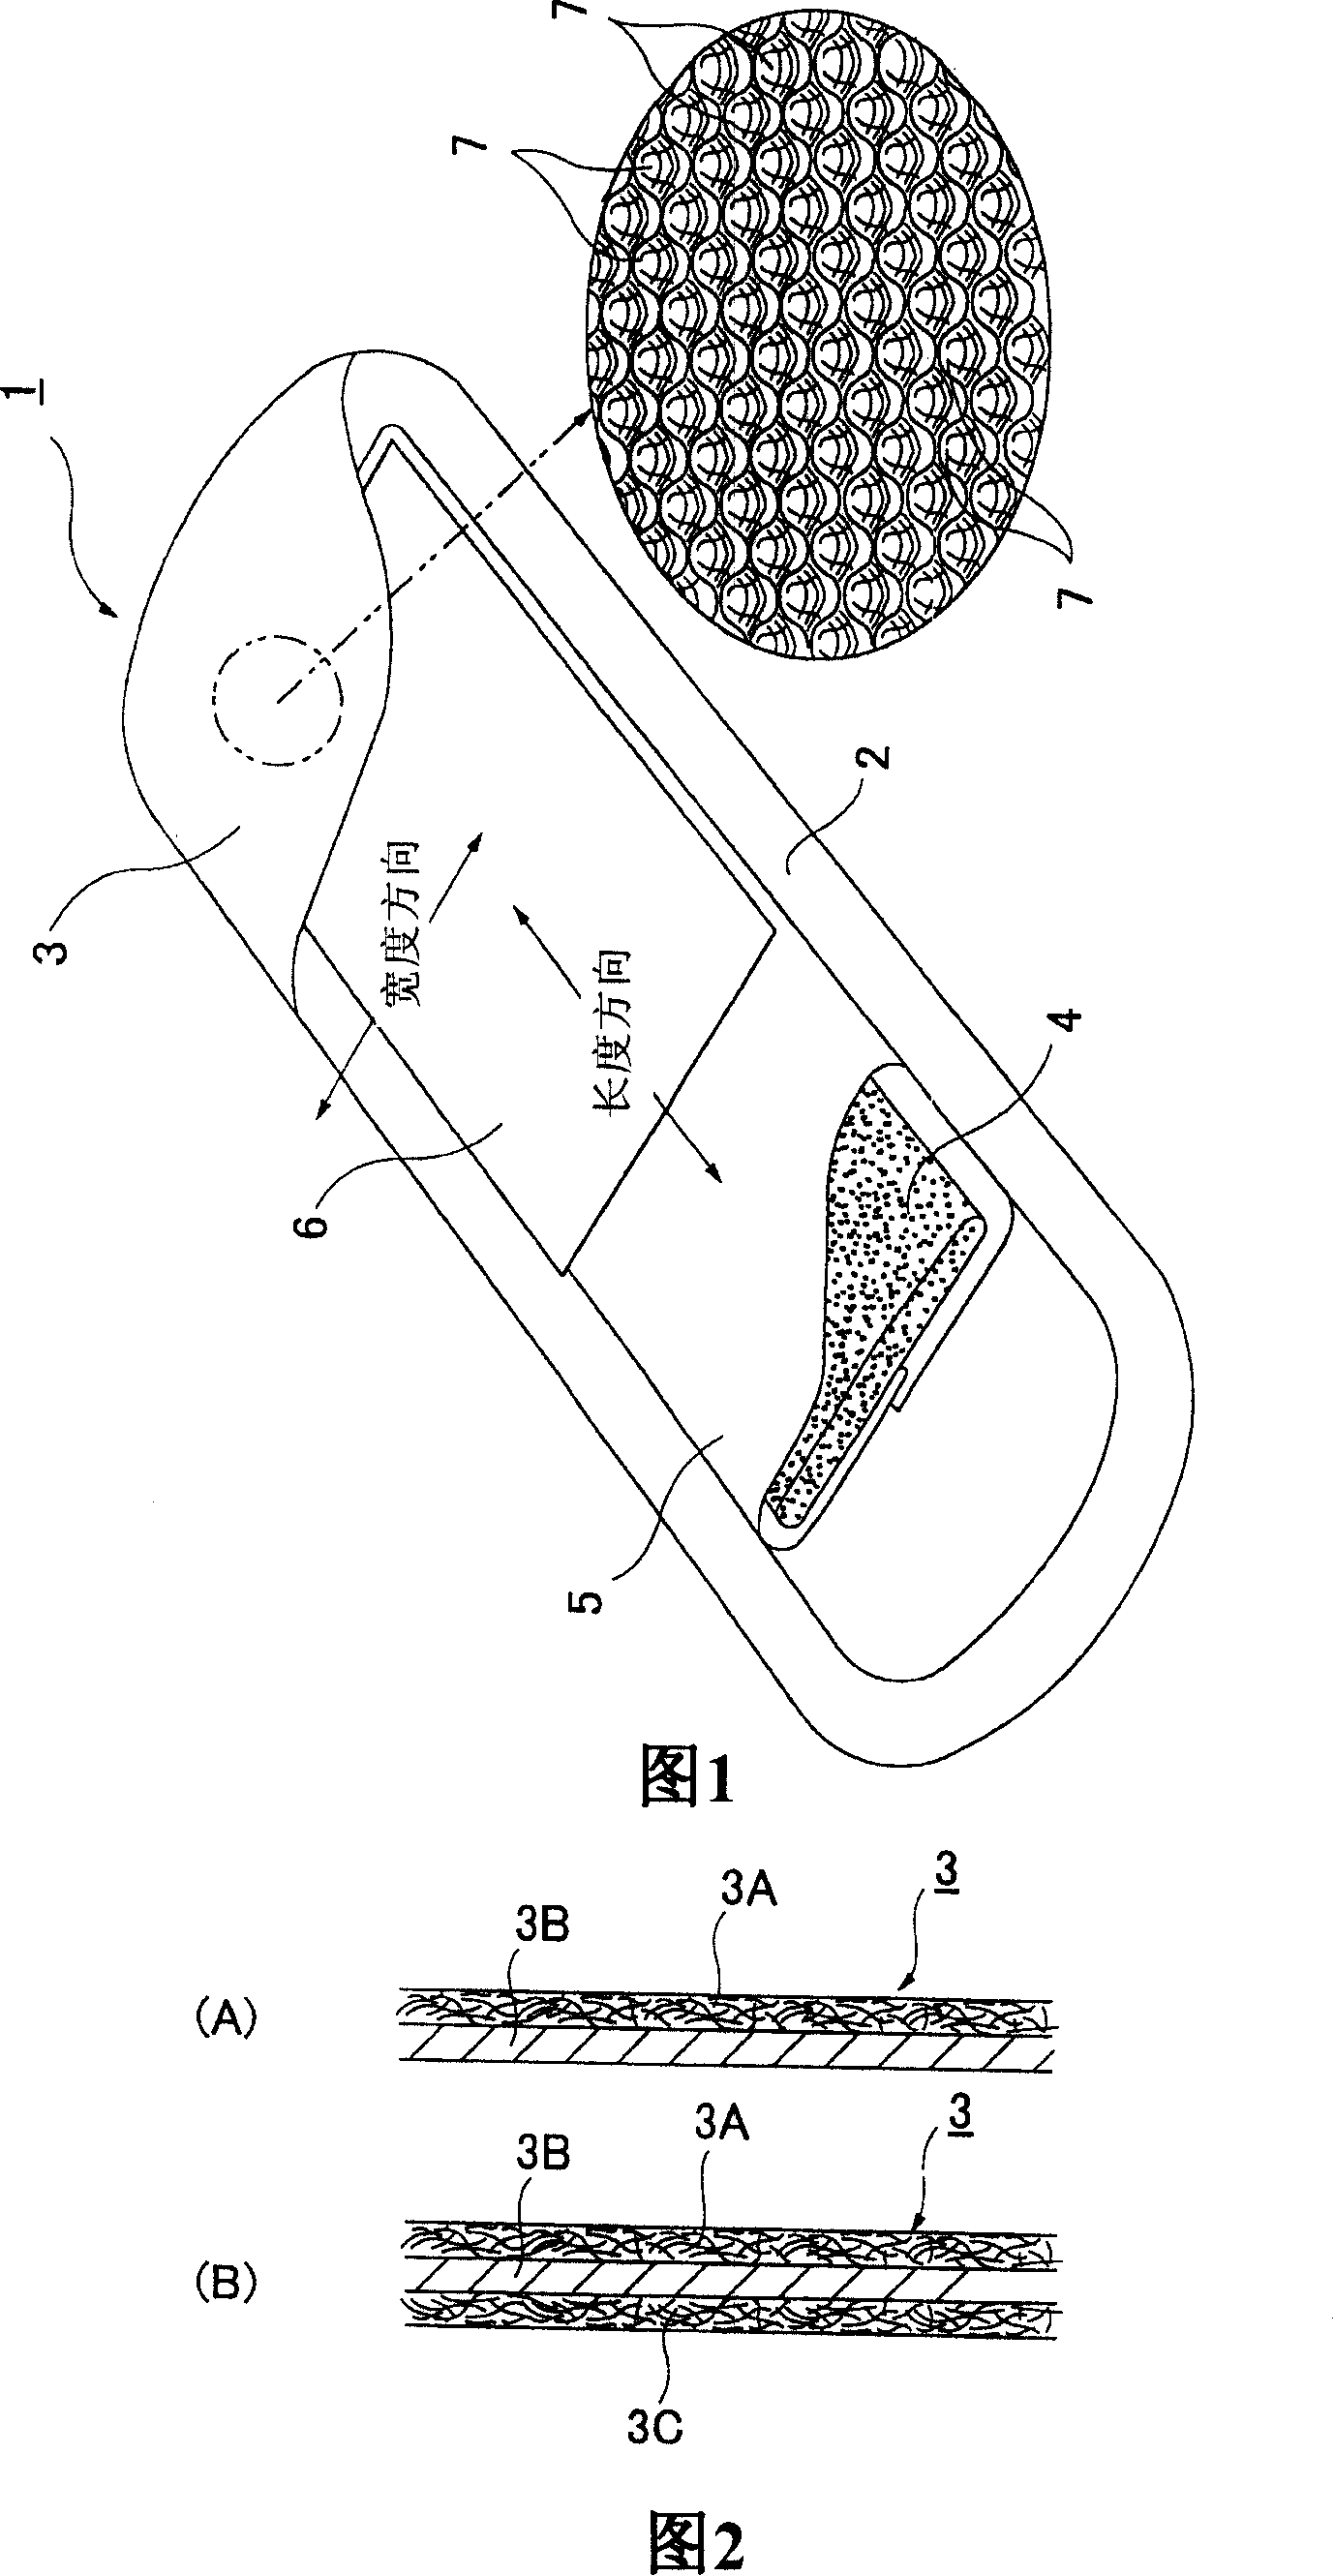 Absorbent article and surface sheet thereof